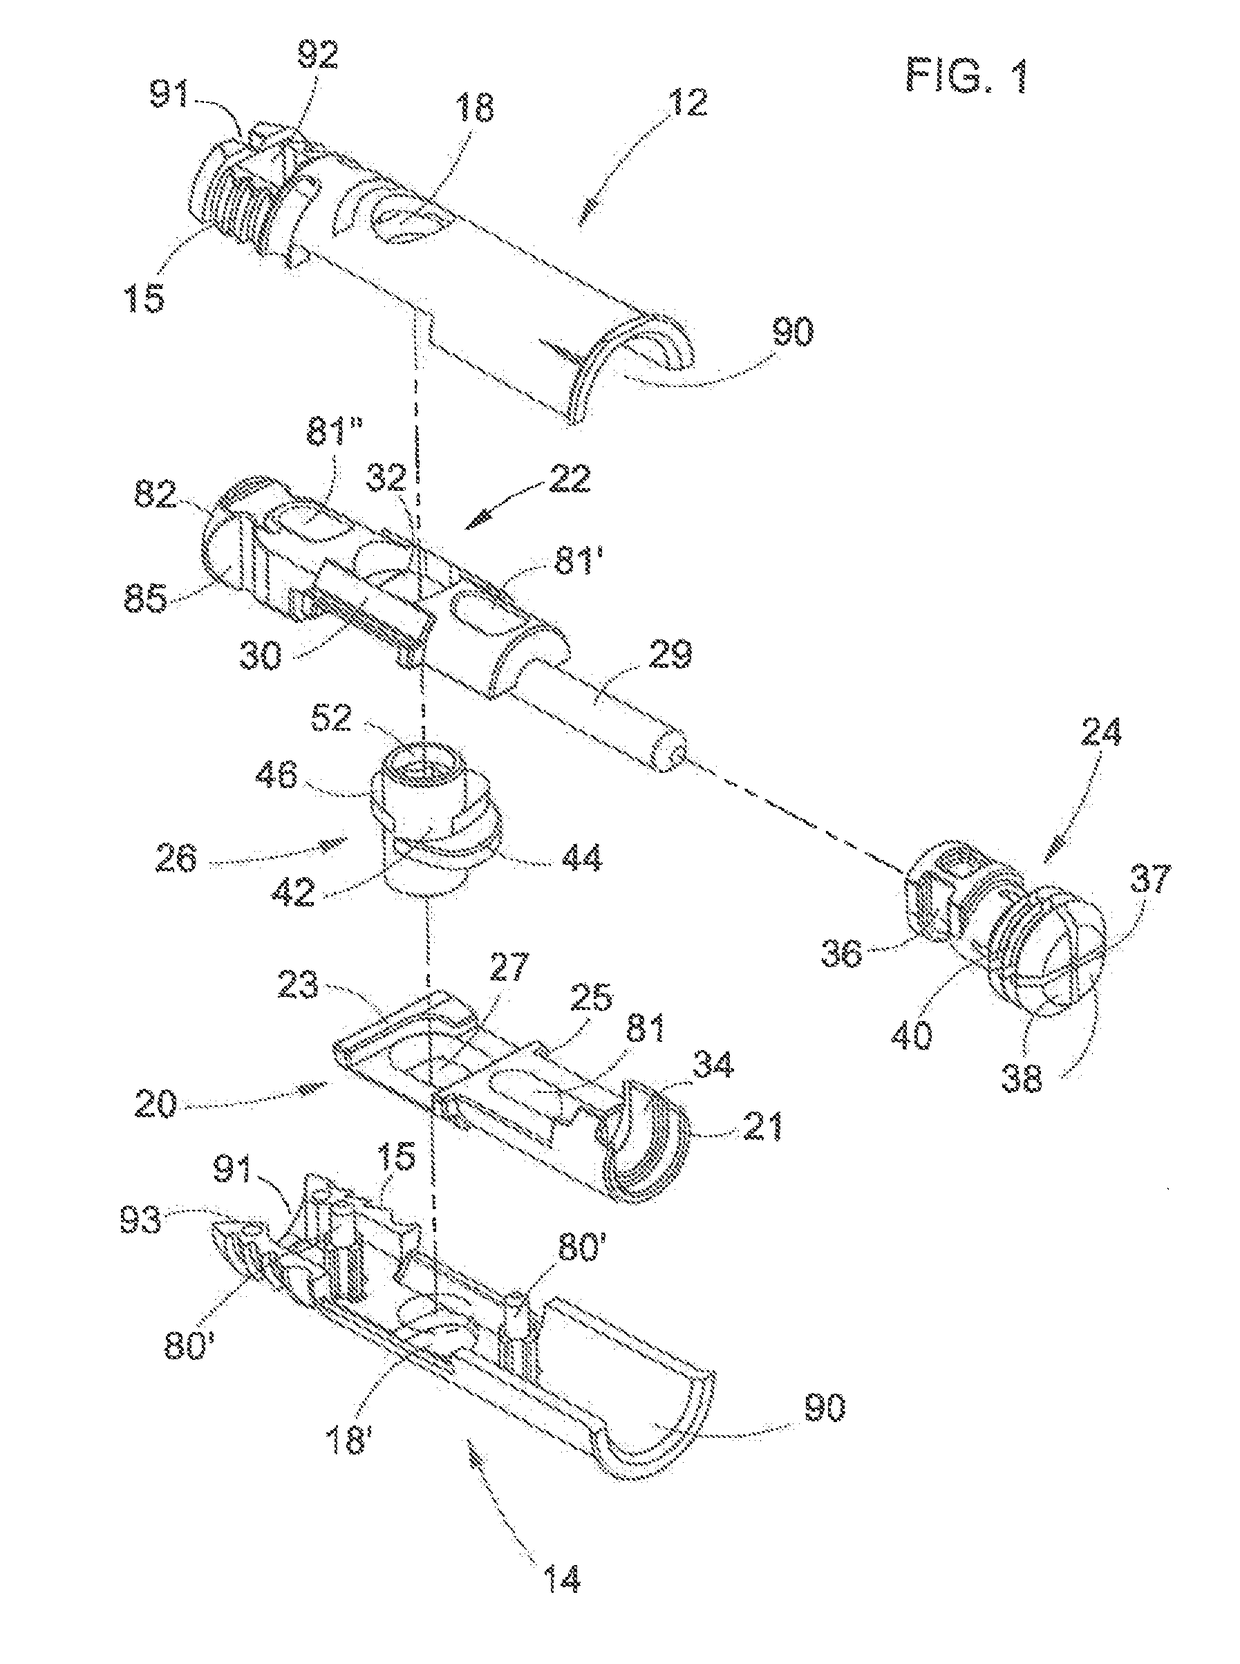 Device for joining parts of furniture and furnishing accessories